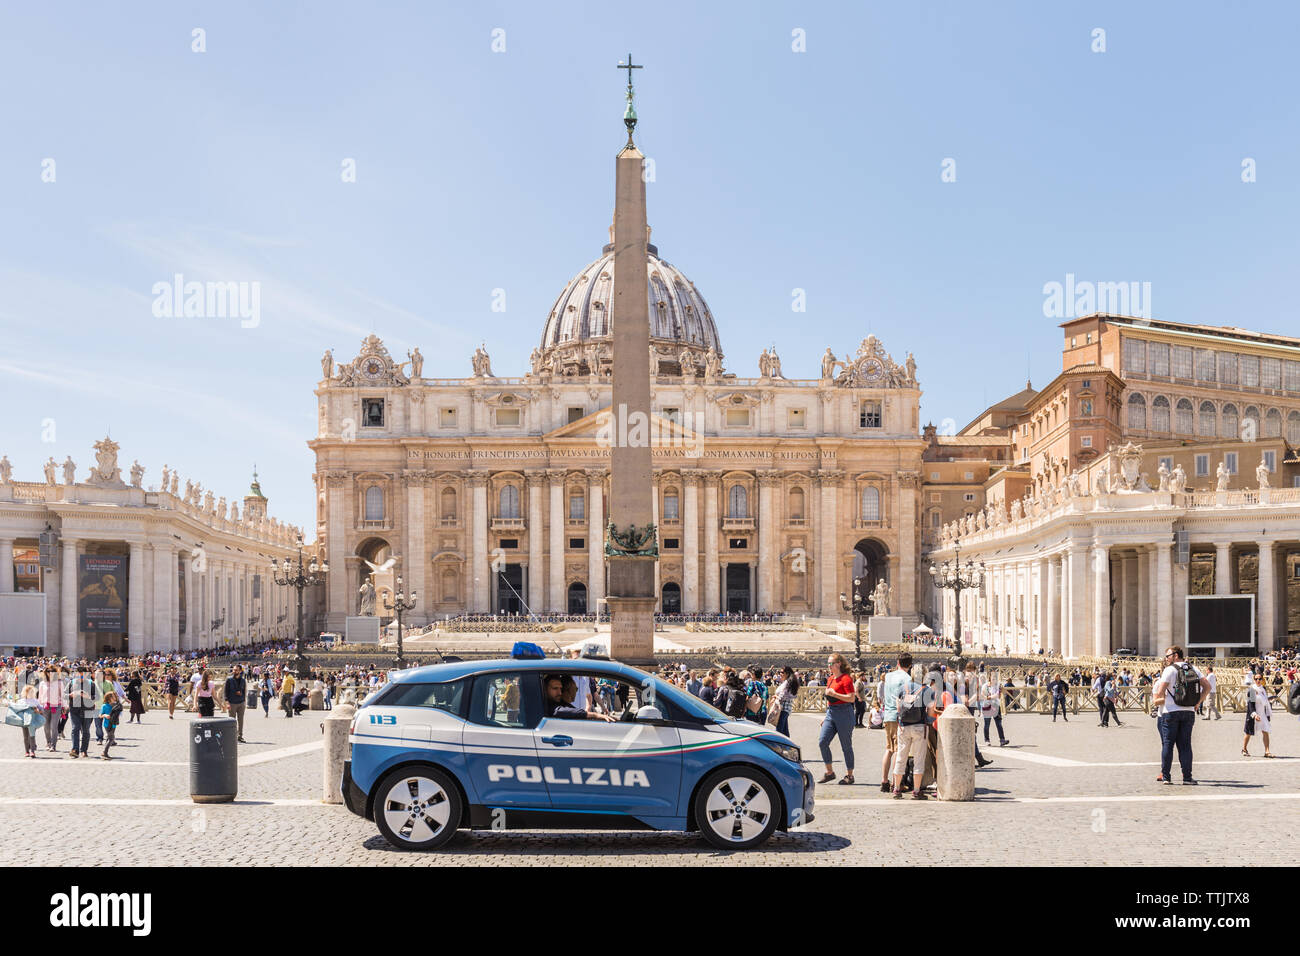 VATICAN CITY - APRIL 27, 2019: Police car at Saint Peter's Square, Piazza di San Pietro, for the safety of the people. Stock Photo